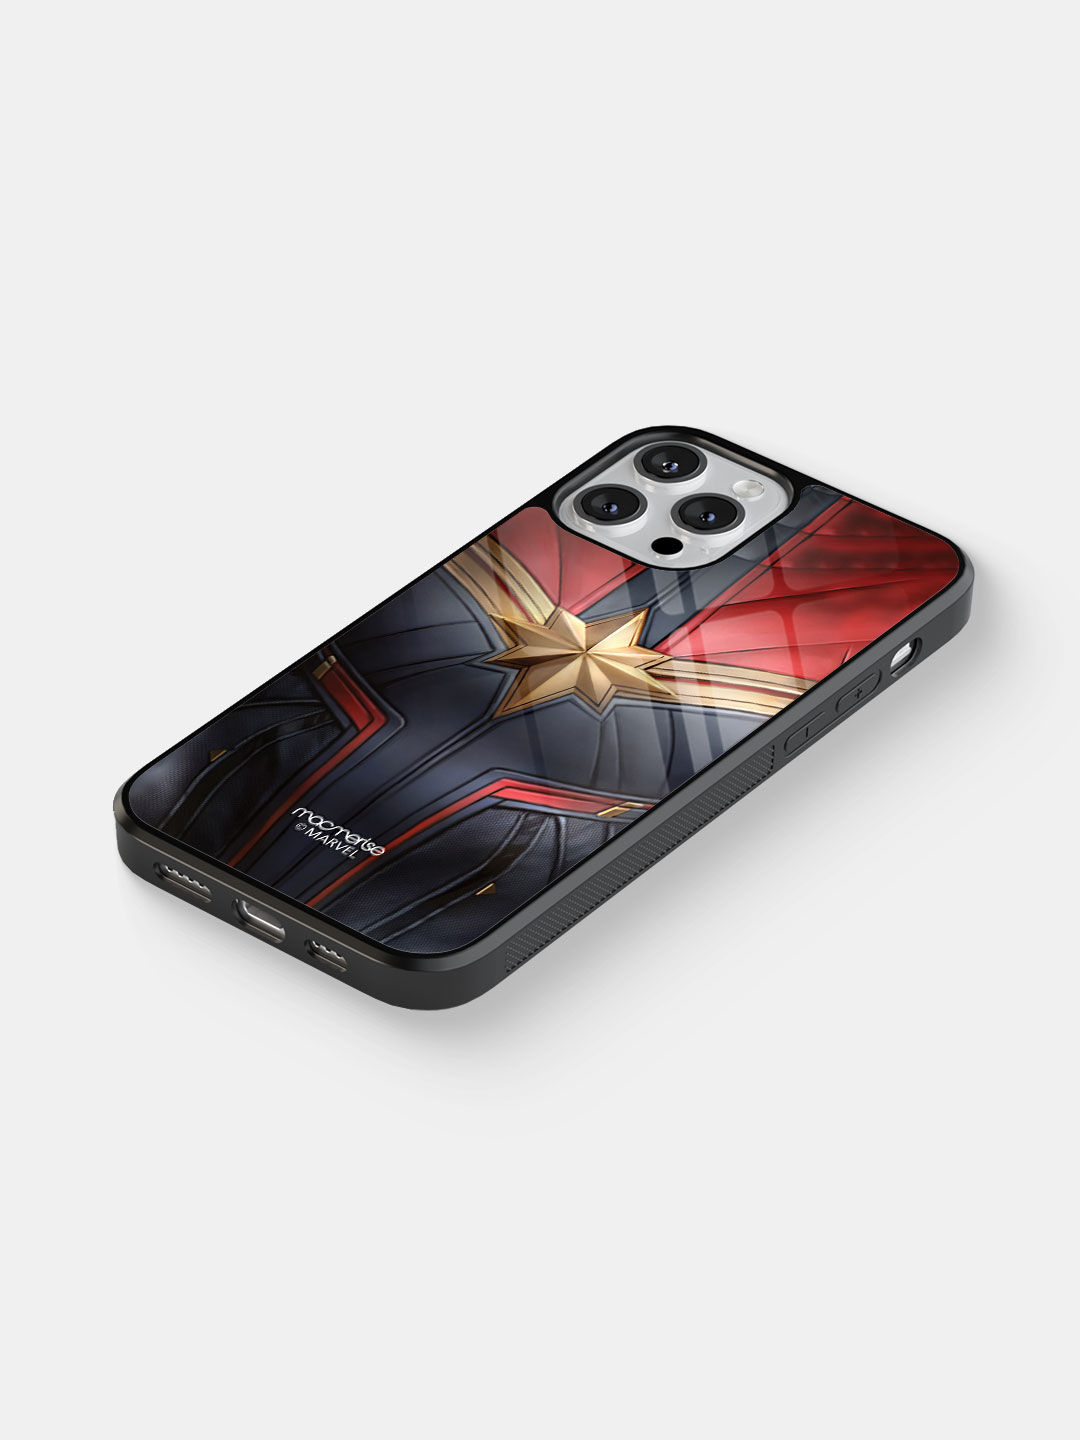 Suit up Captain Marvel - Glass Case For iPhone 13 Pro Max